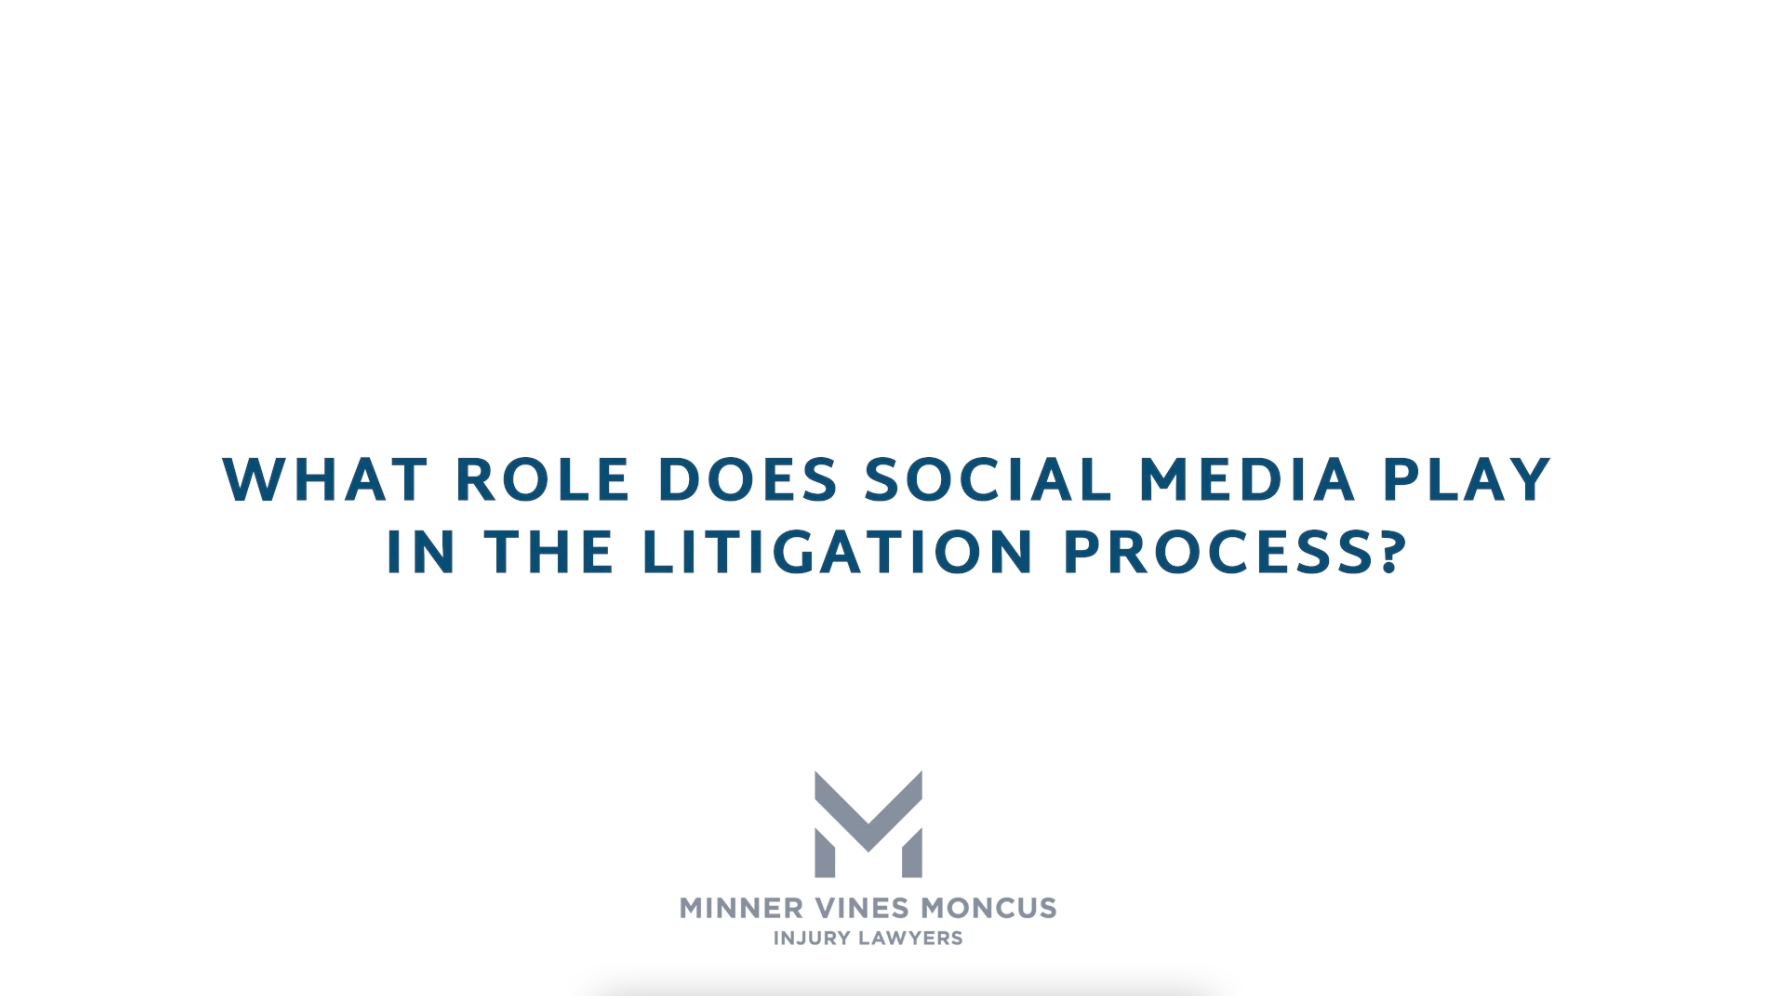 What role does social media play in the litigation process?